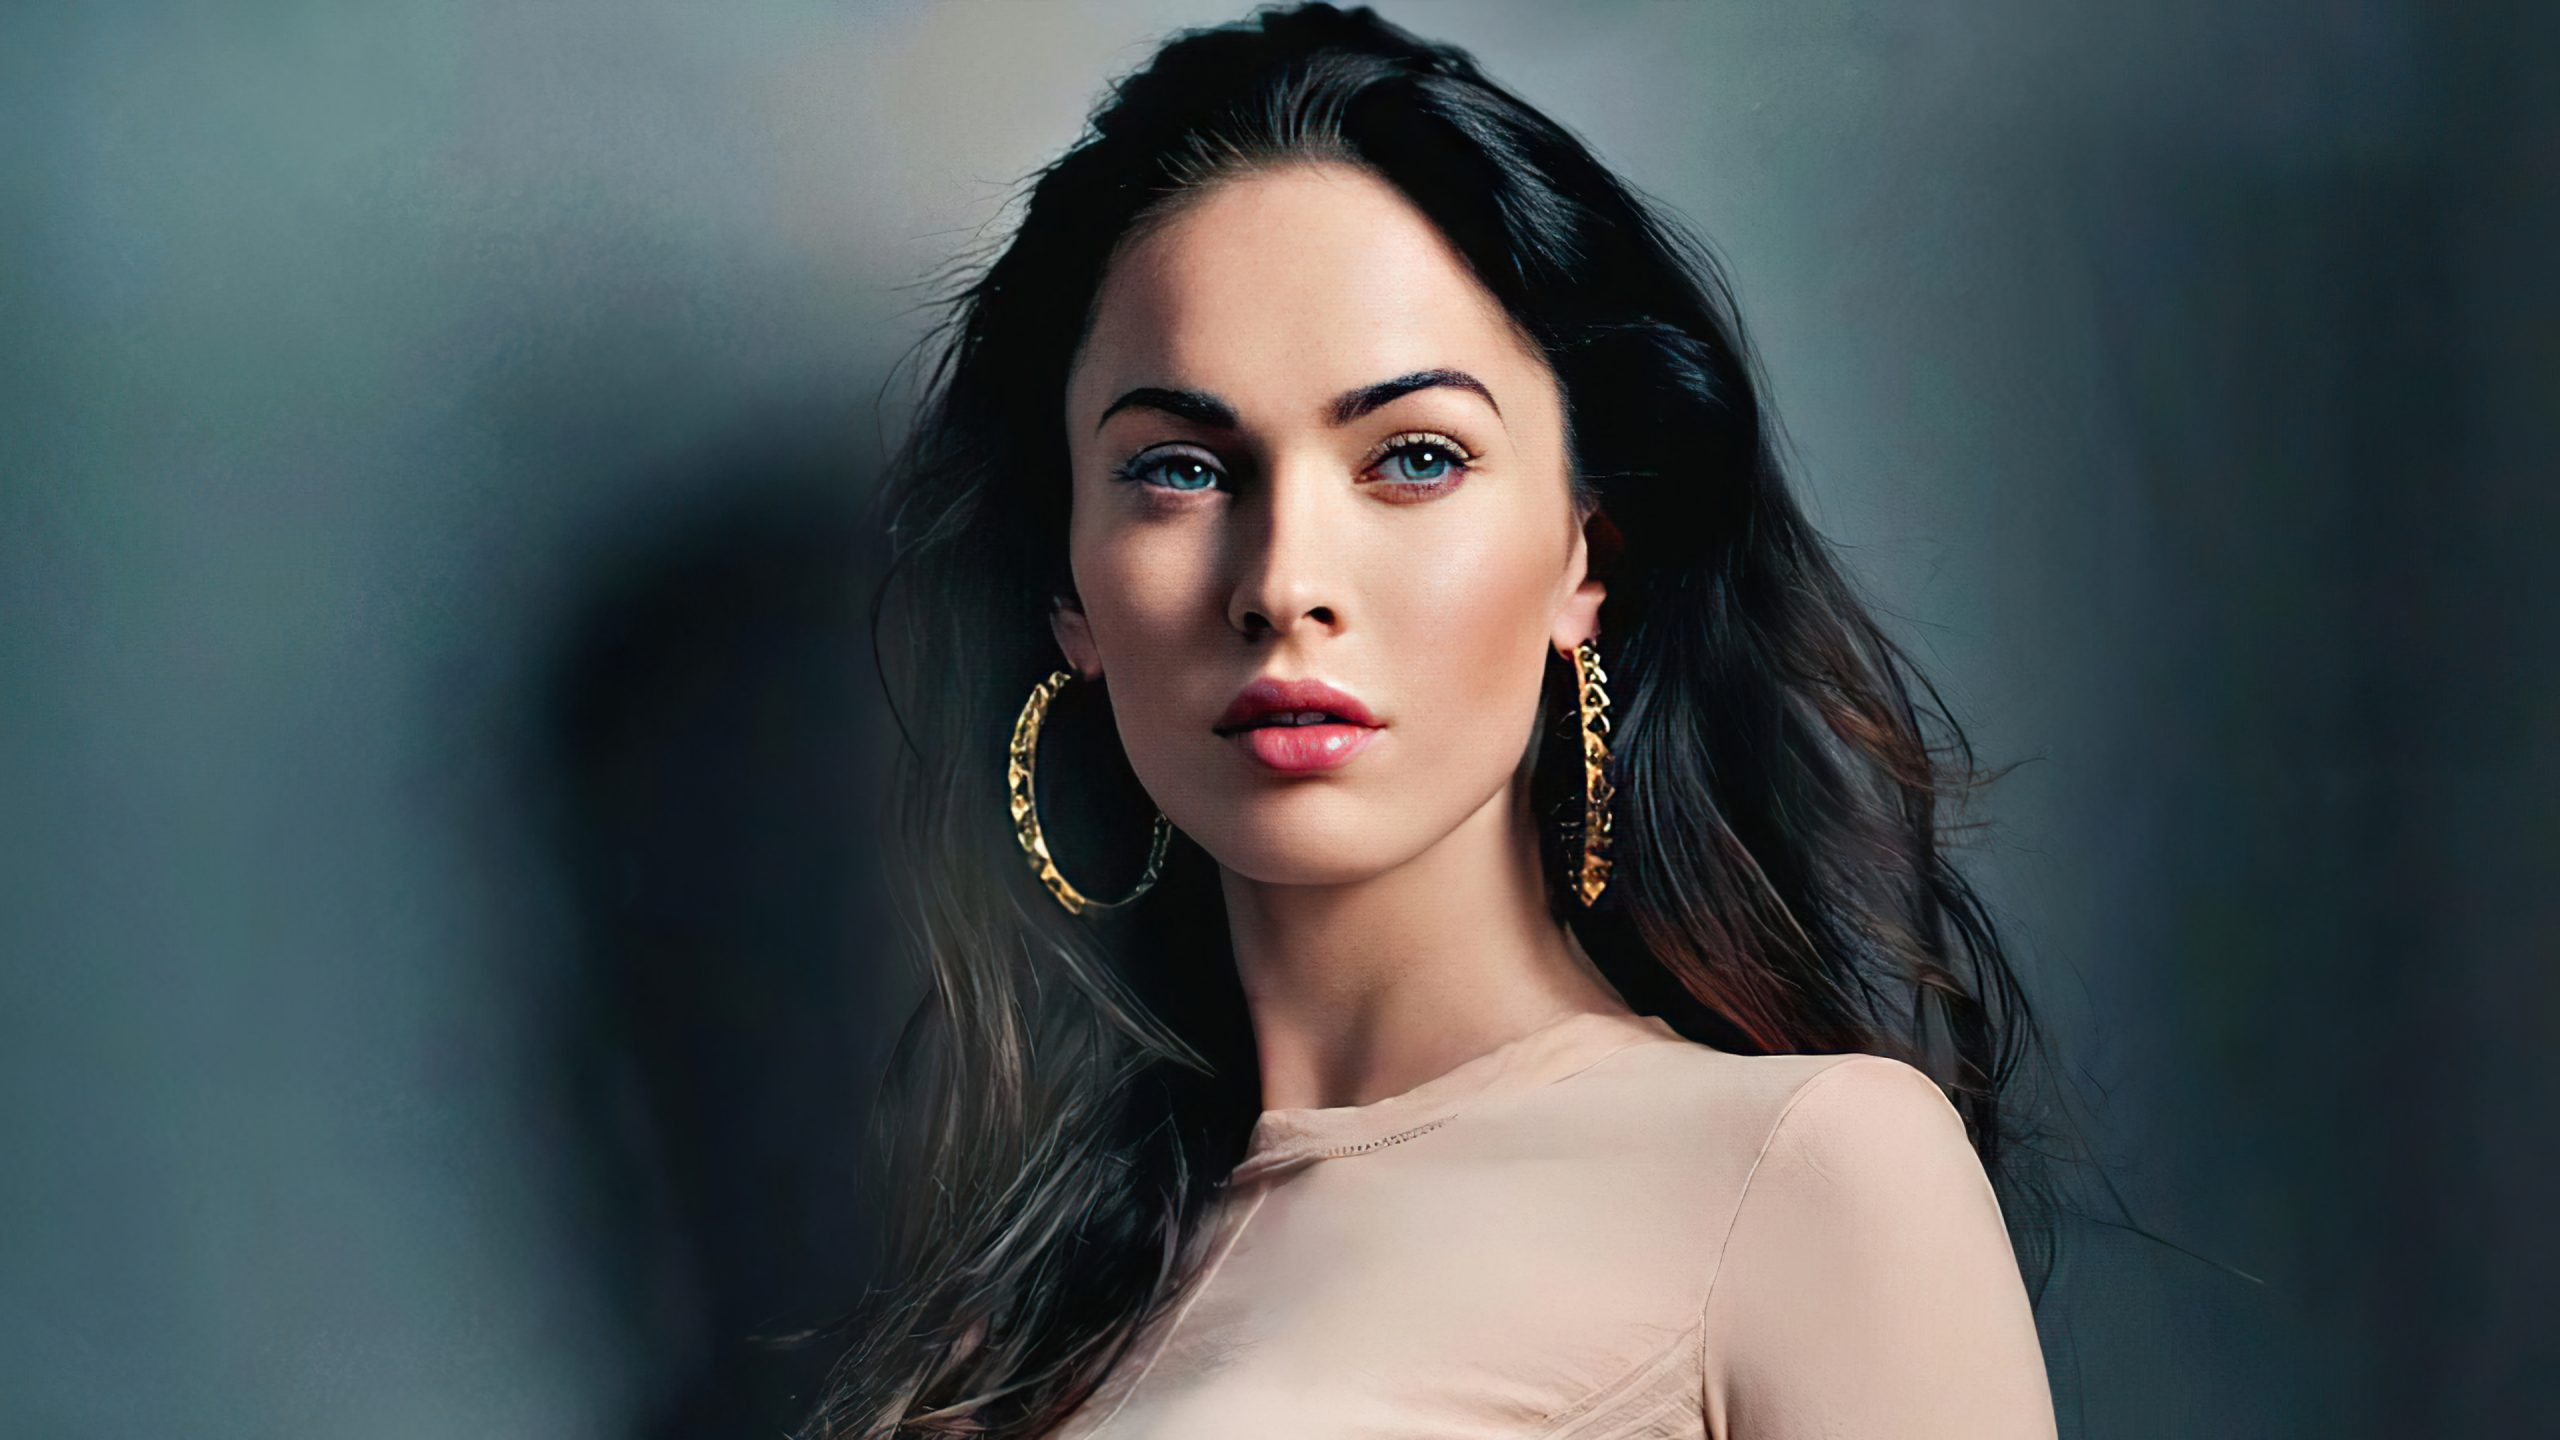 Megan Fox - Personal Life, Filmography, Childhood, Age, Net Worth And More ...